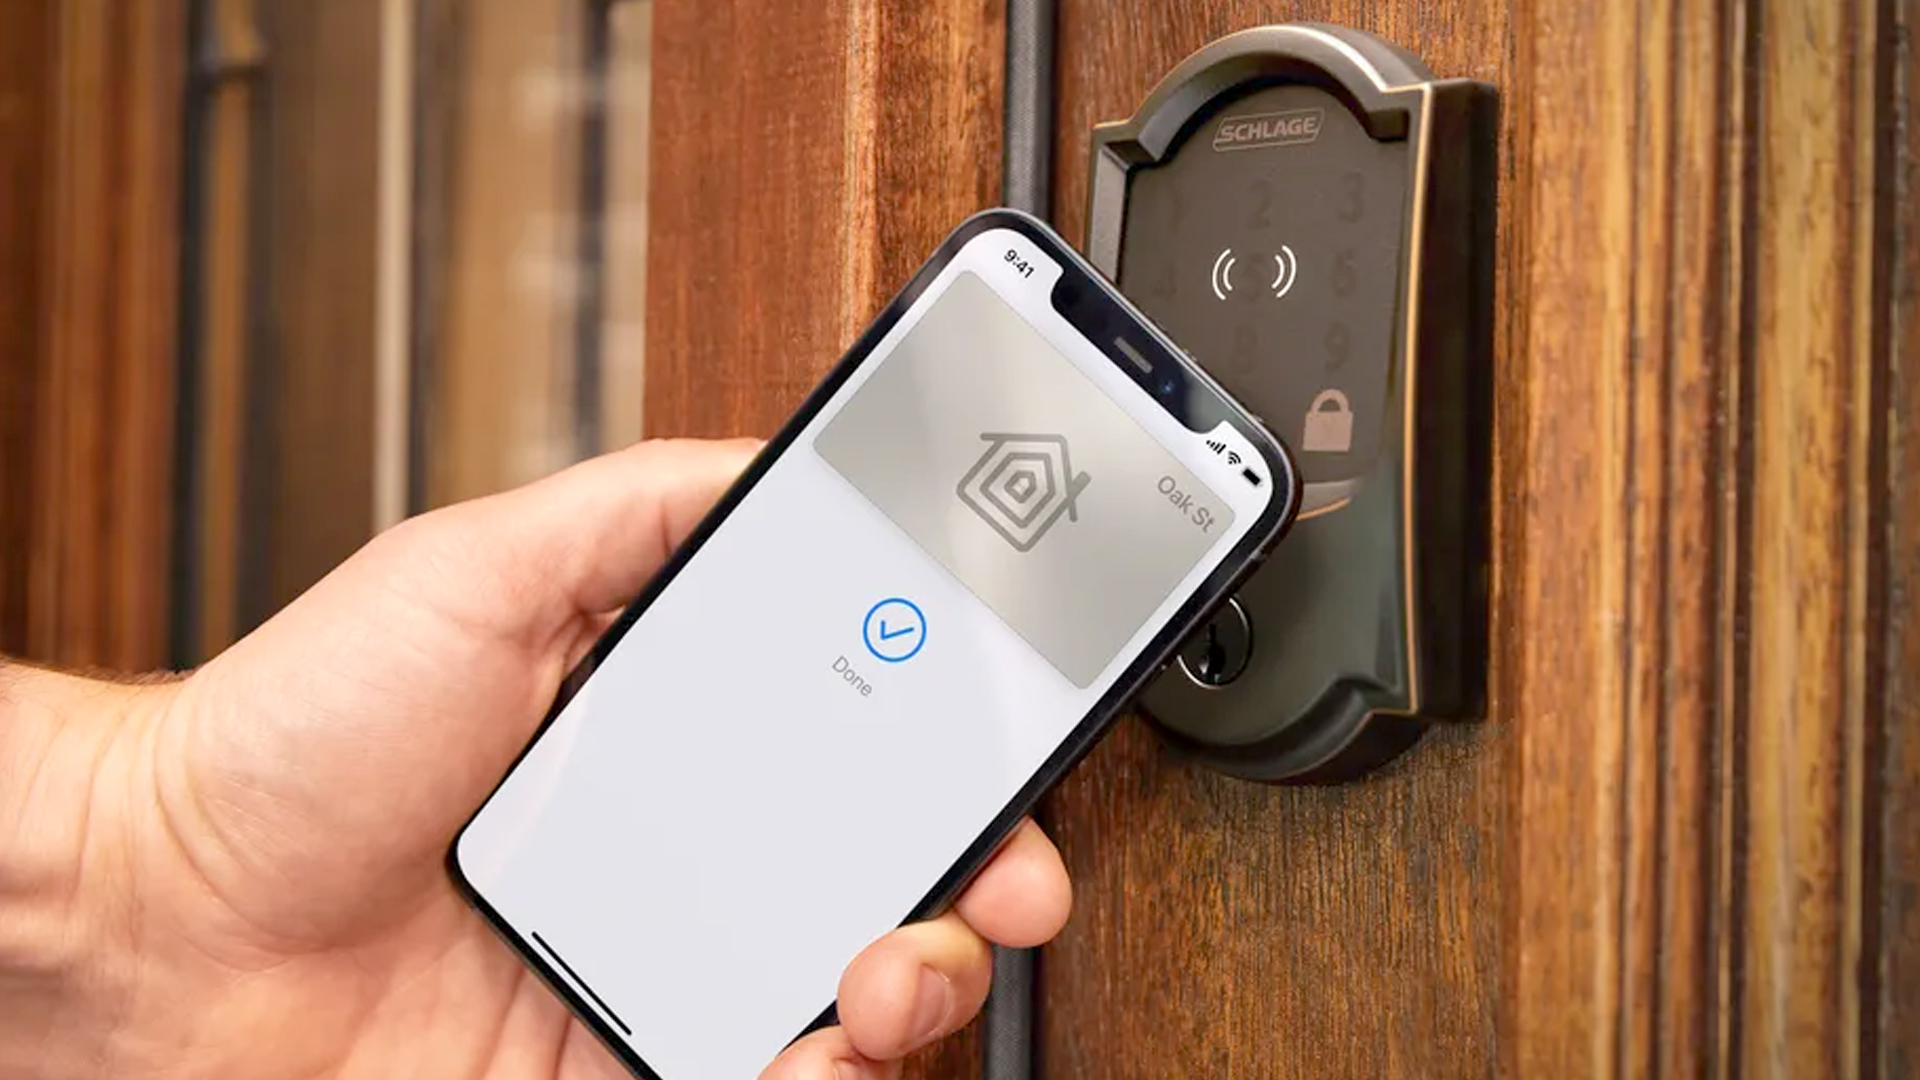 The Schlage Encode Plus and Apple Home Key